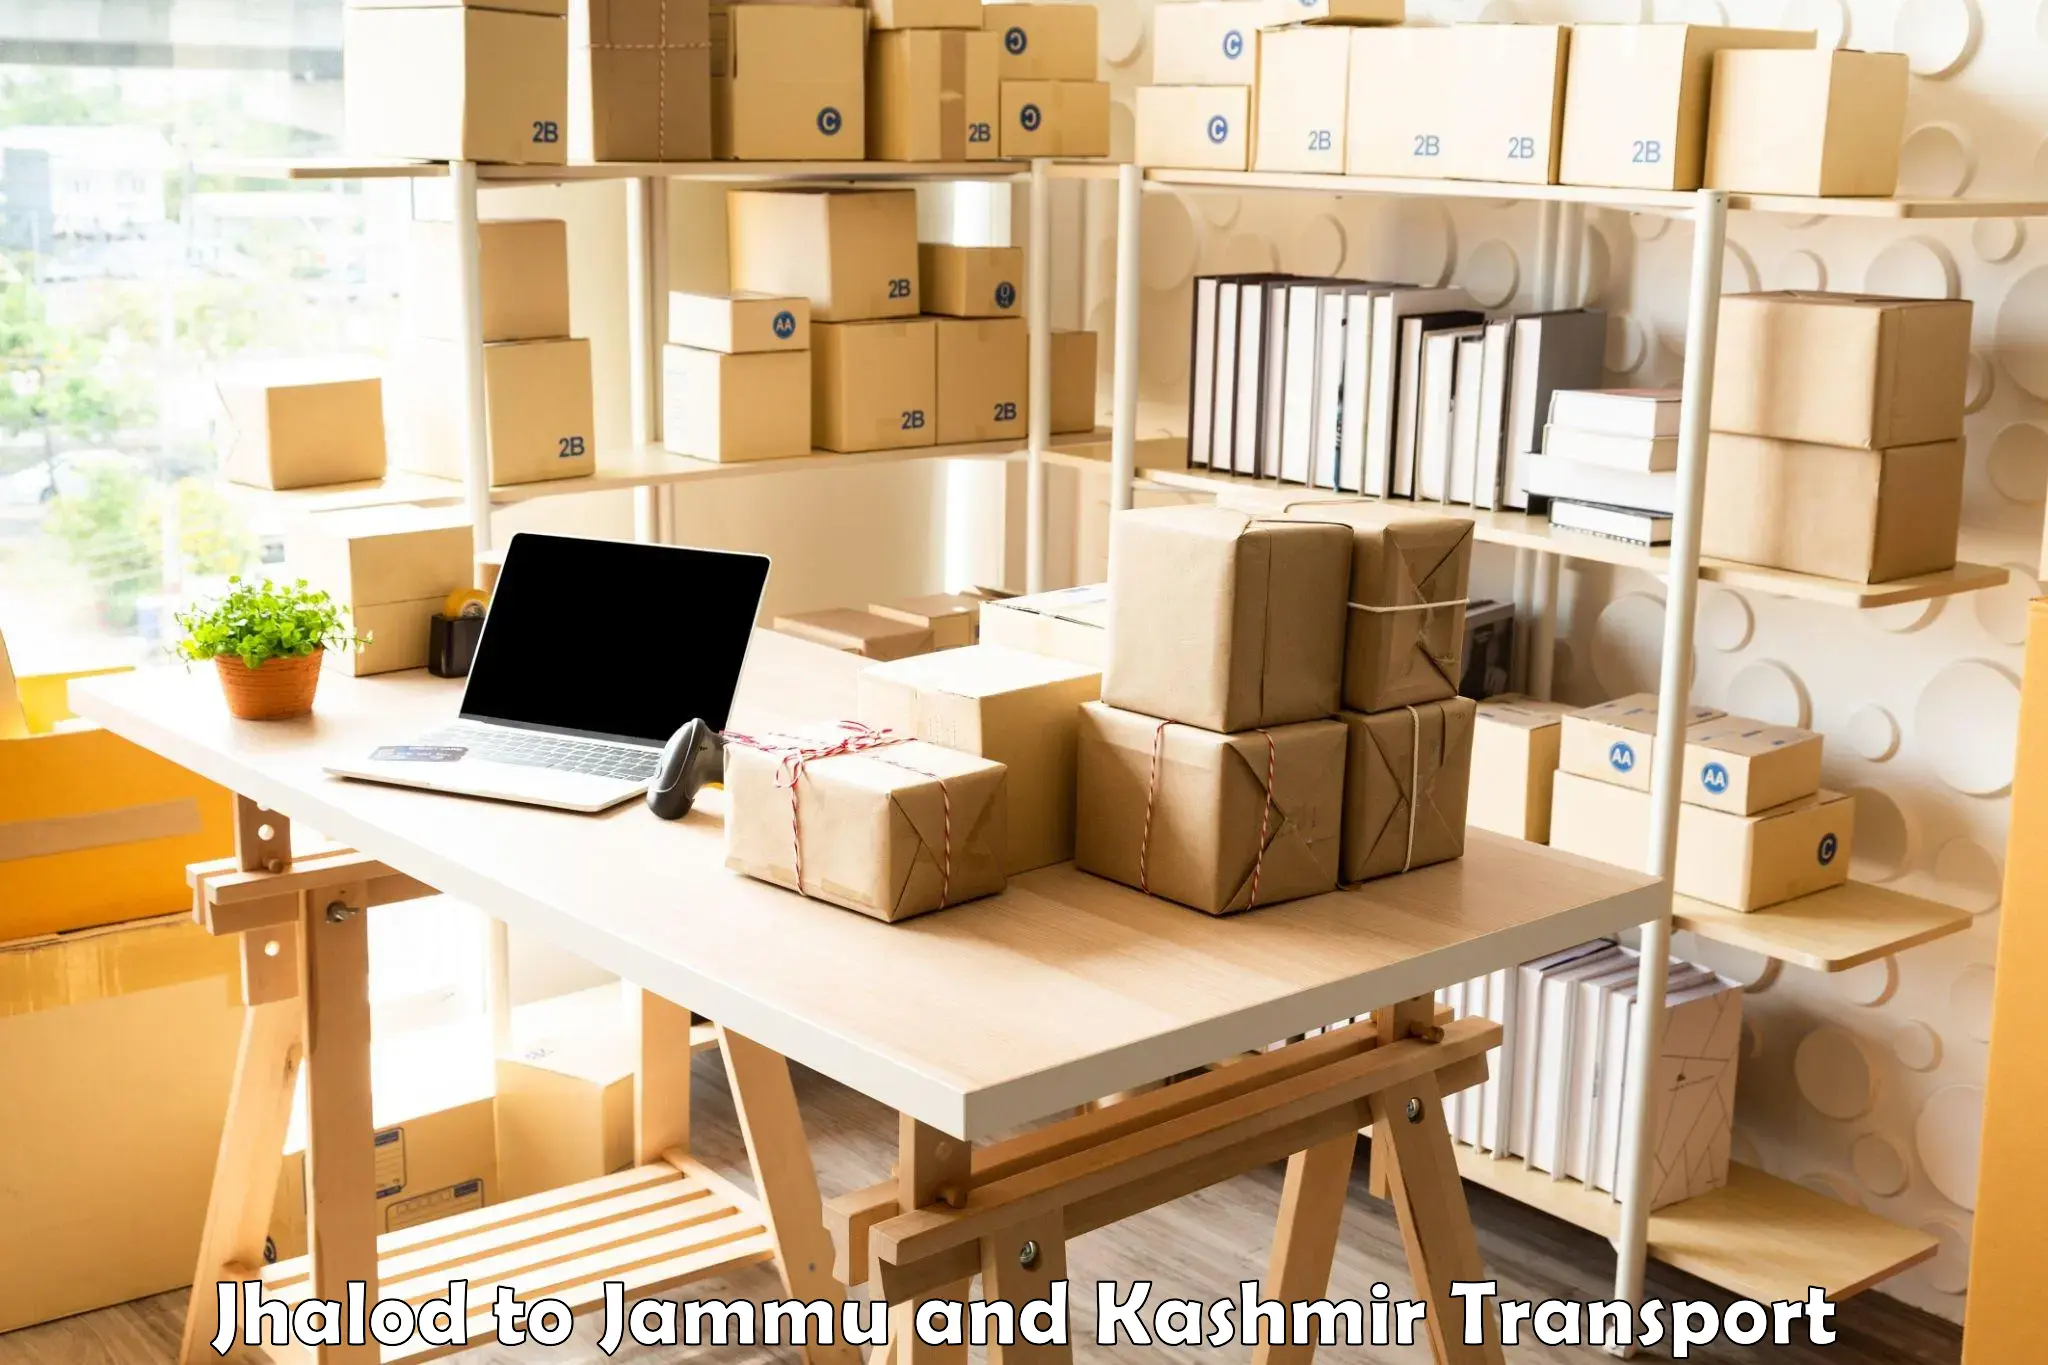 Package delivery services Jhalod to Anantnag